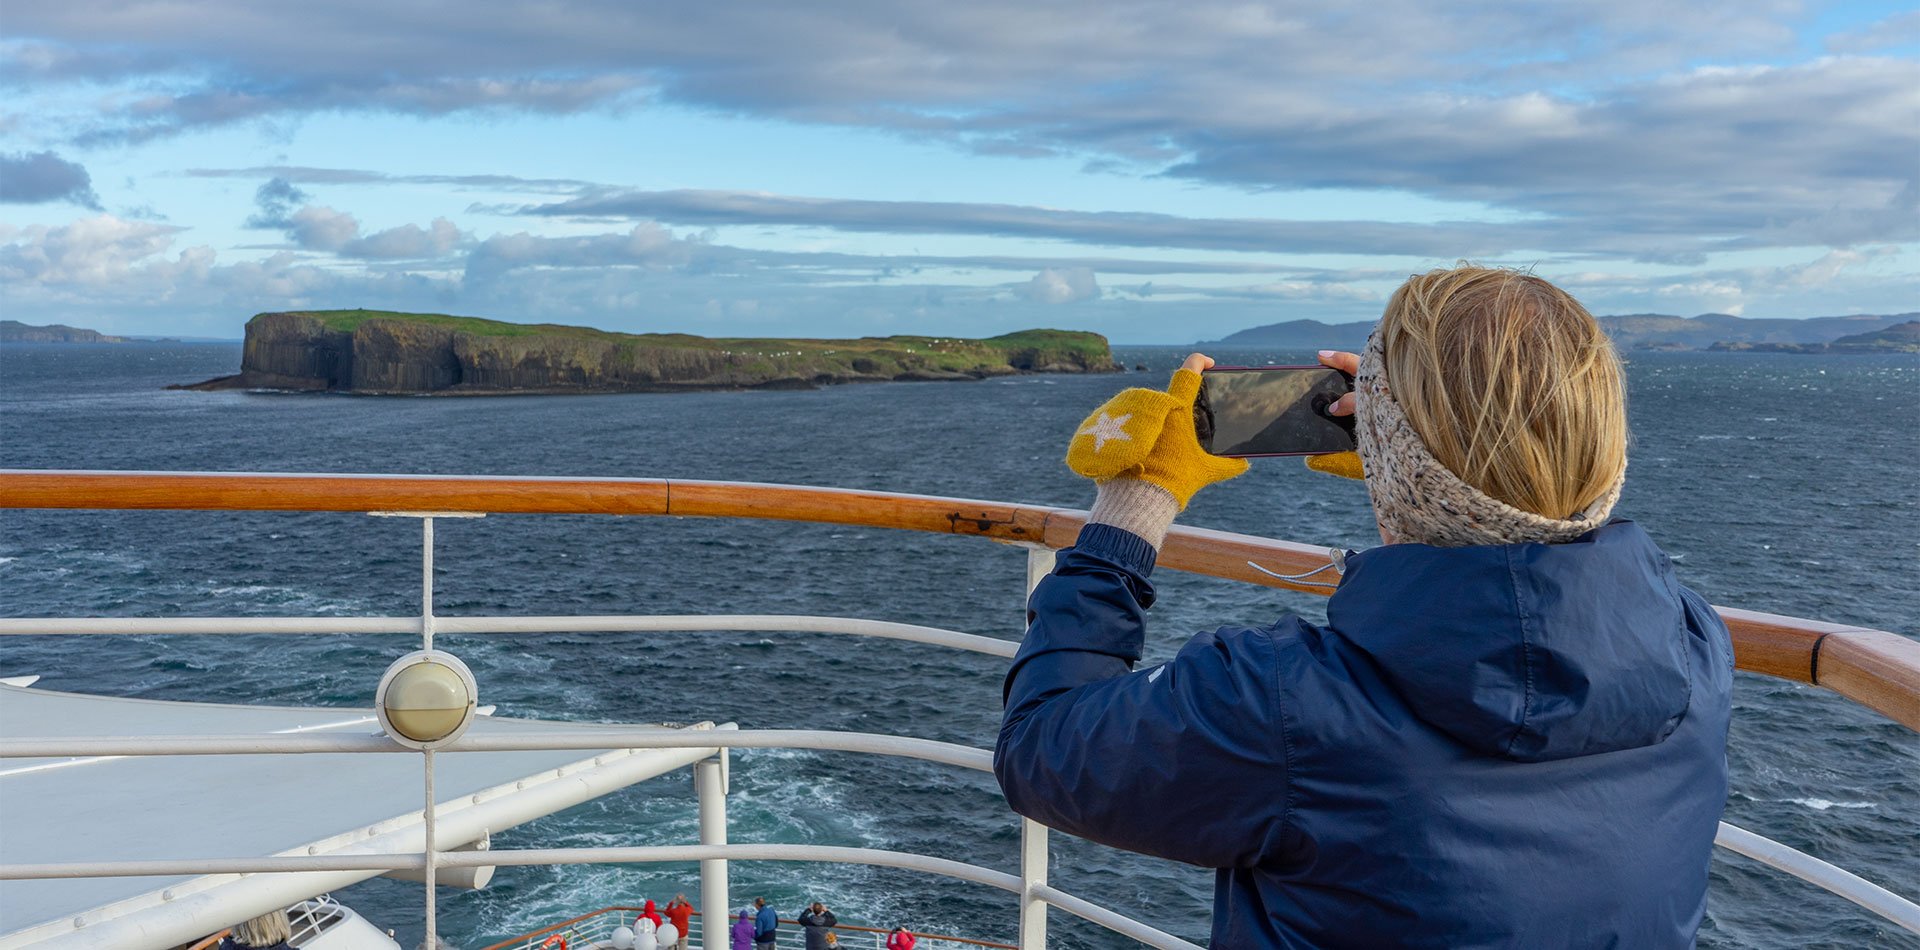 Guest taking a picture of Fingal's cave from deck